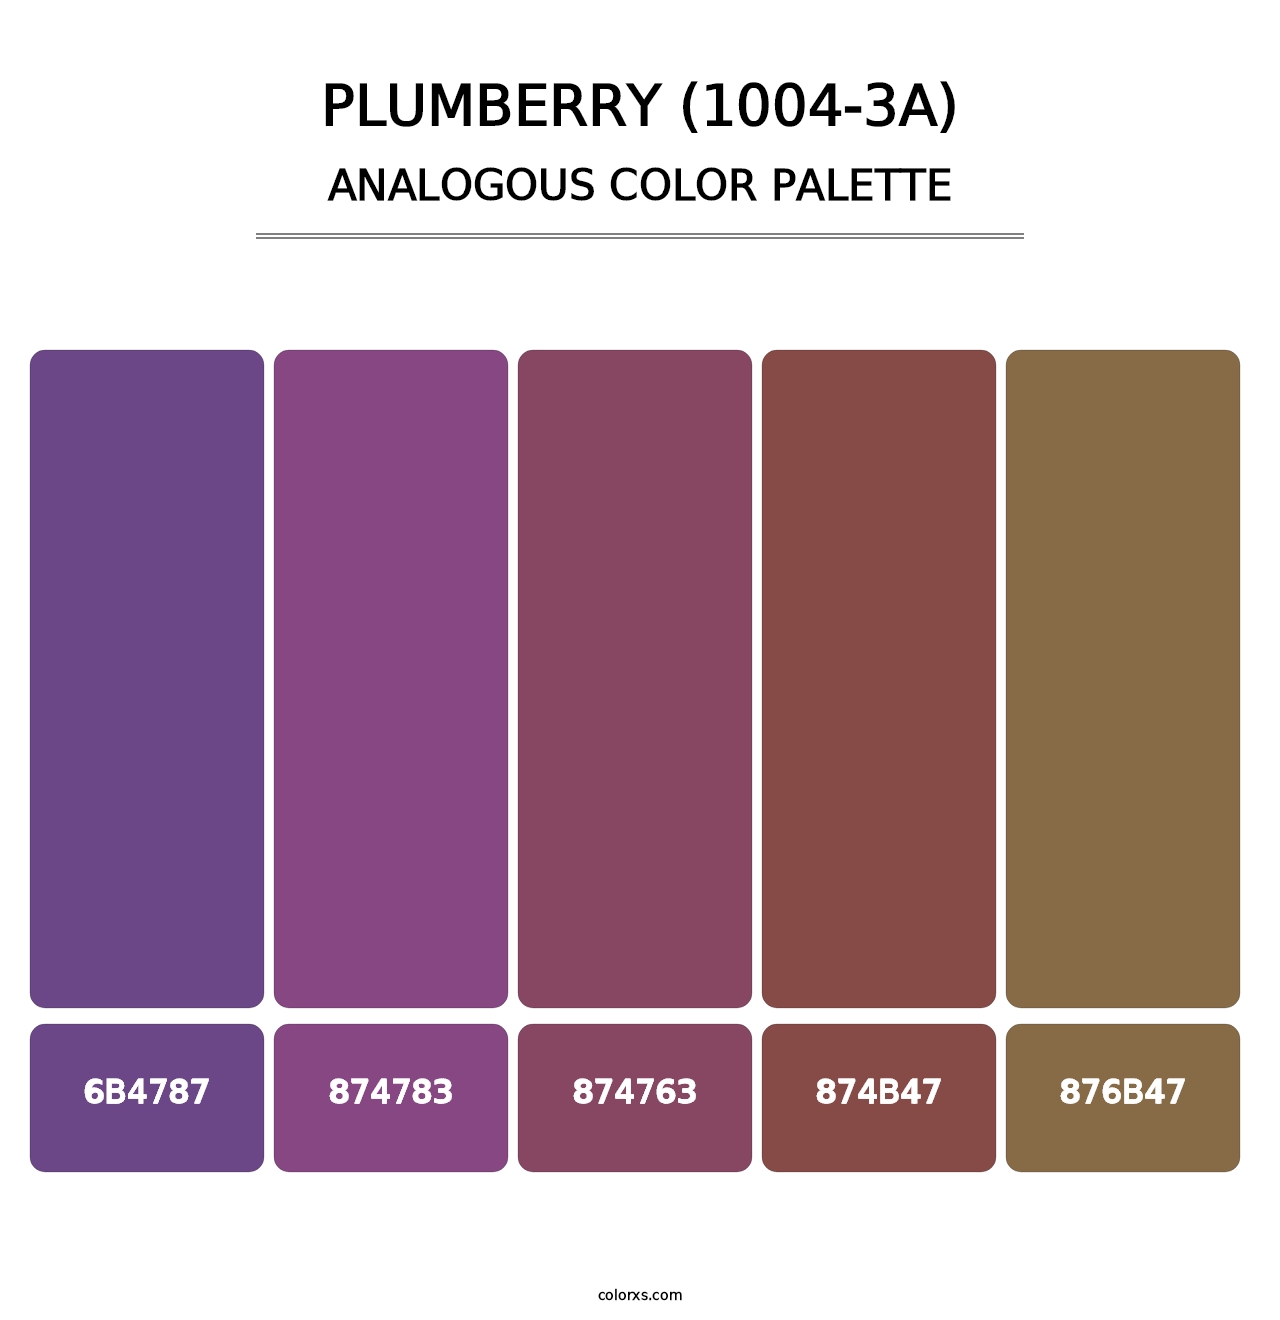 Plumberry (1004-3A) - Analogous Color Palette